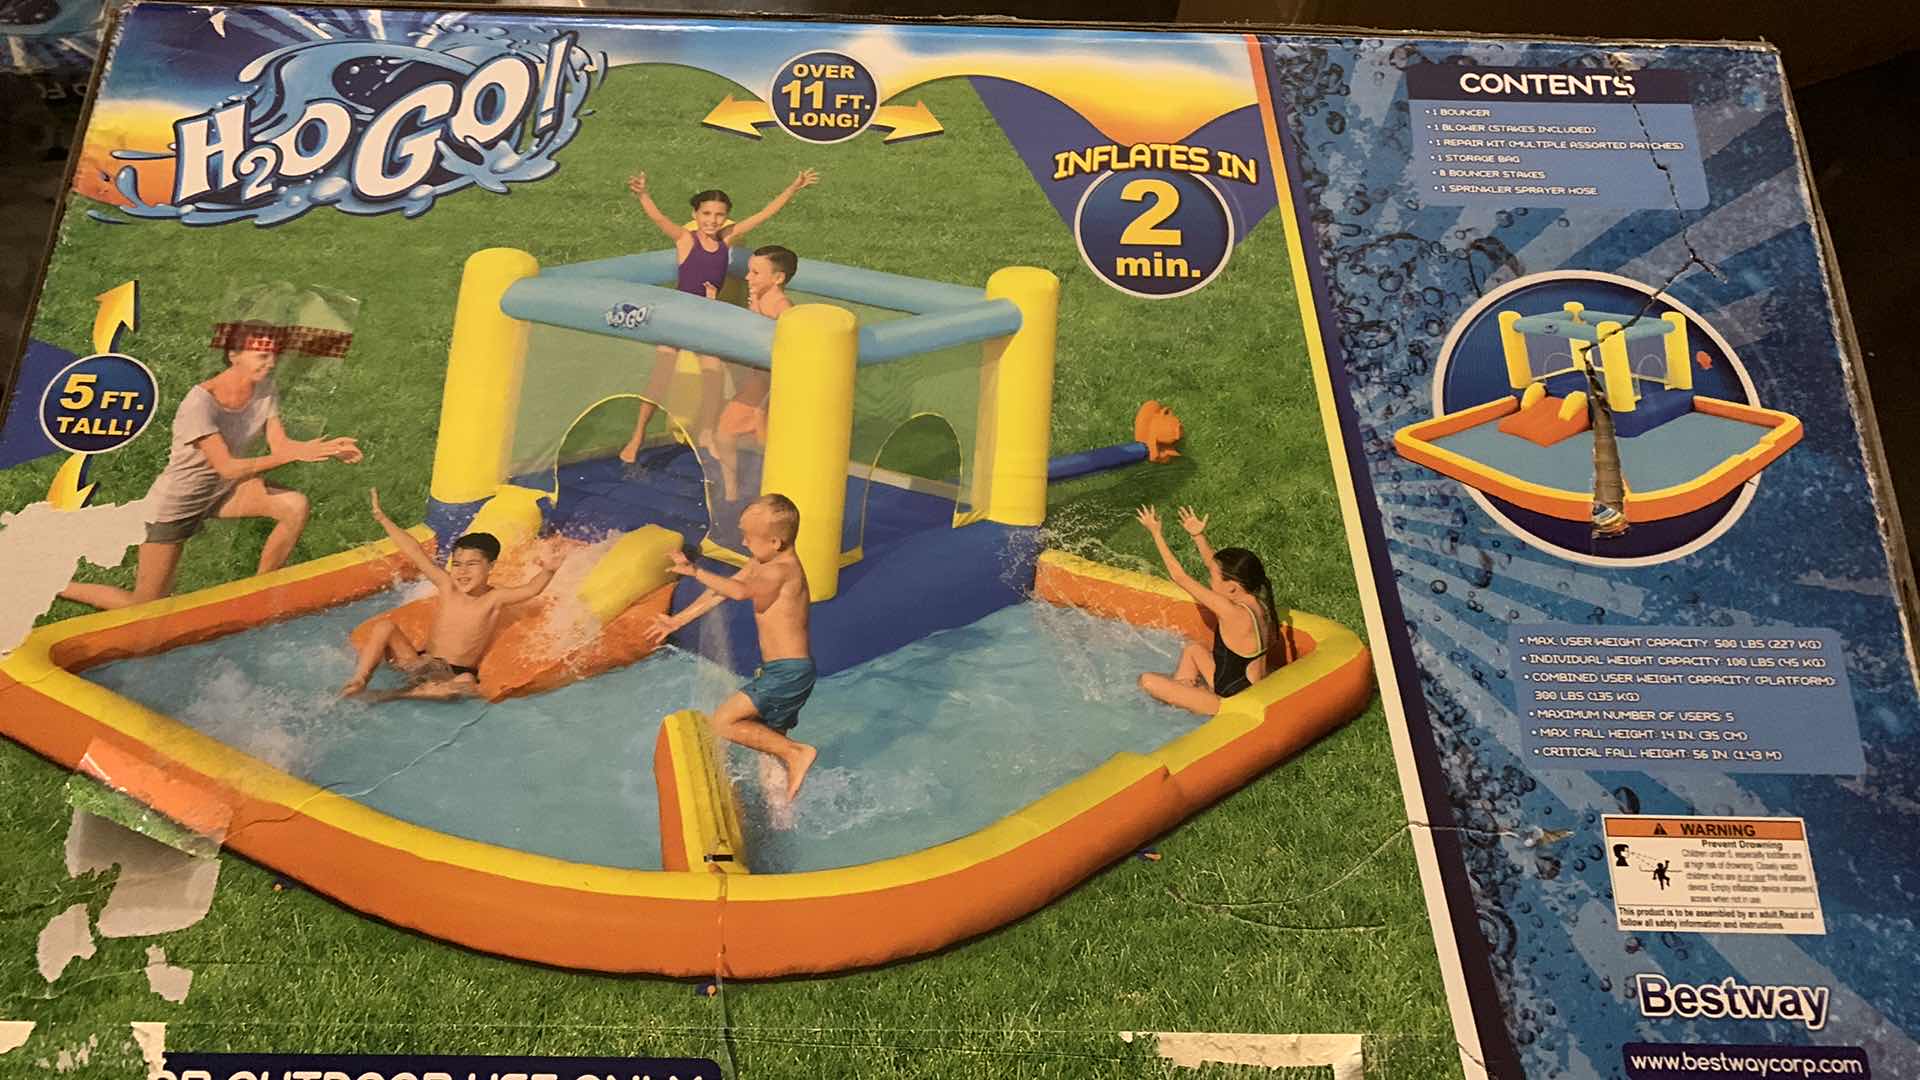 Photo 1 of H2GO BESTWAY BEACH BOUNCE WATER PARK, POOL AND PLAY OVER 11 FT LONG, INFLATES IN 2 MIN